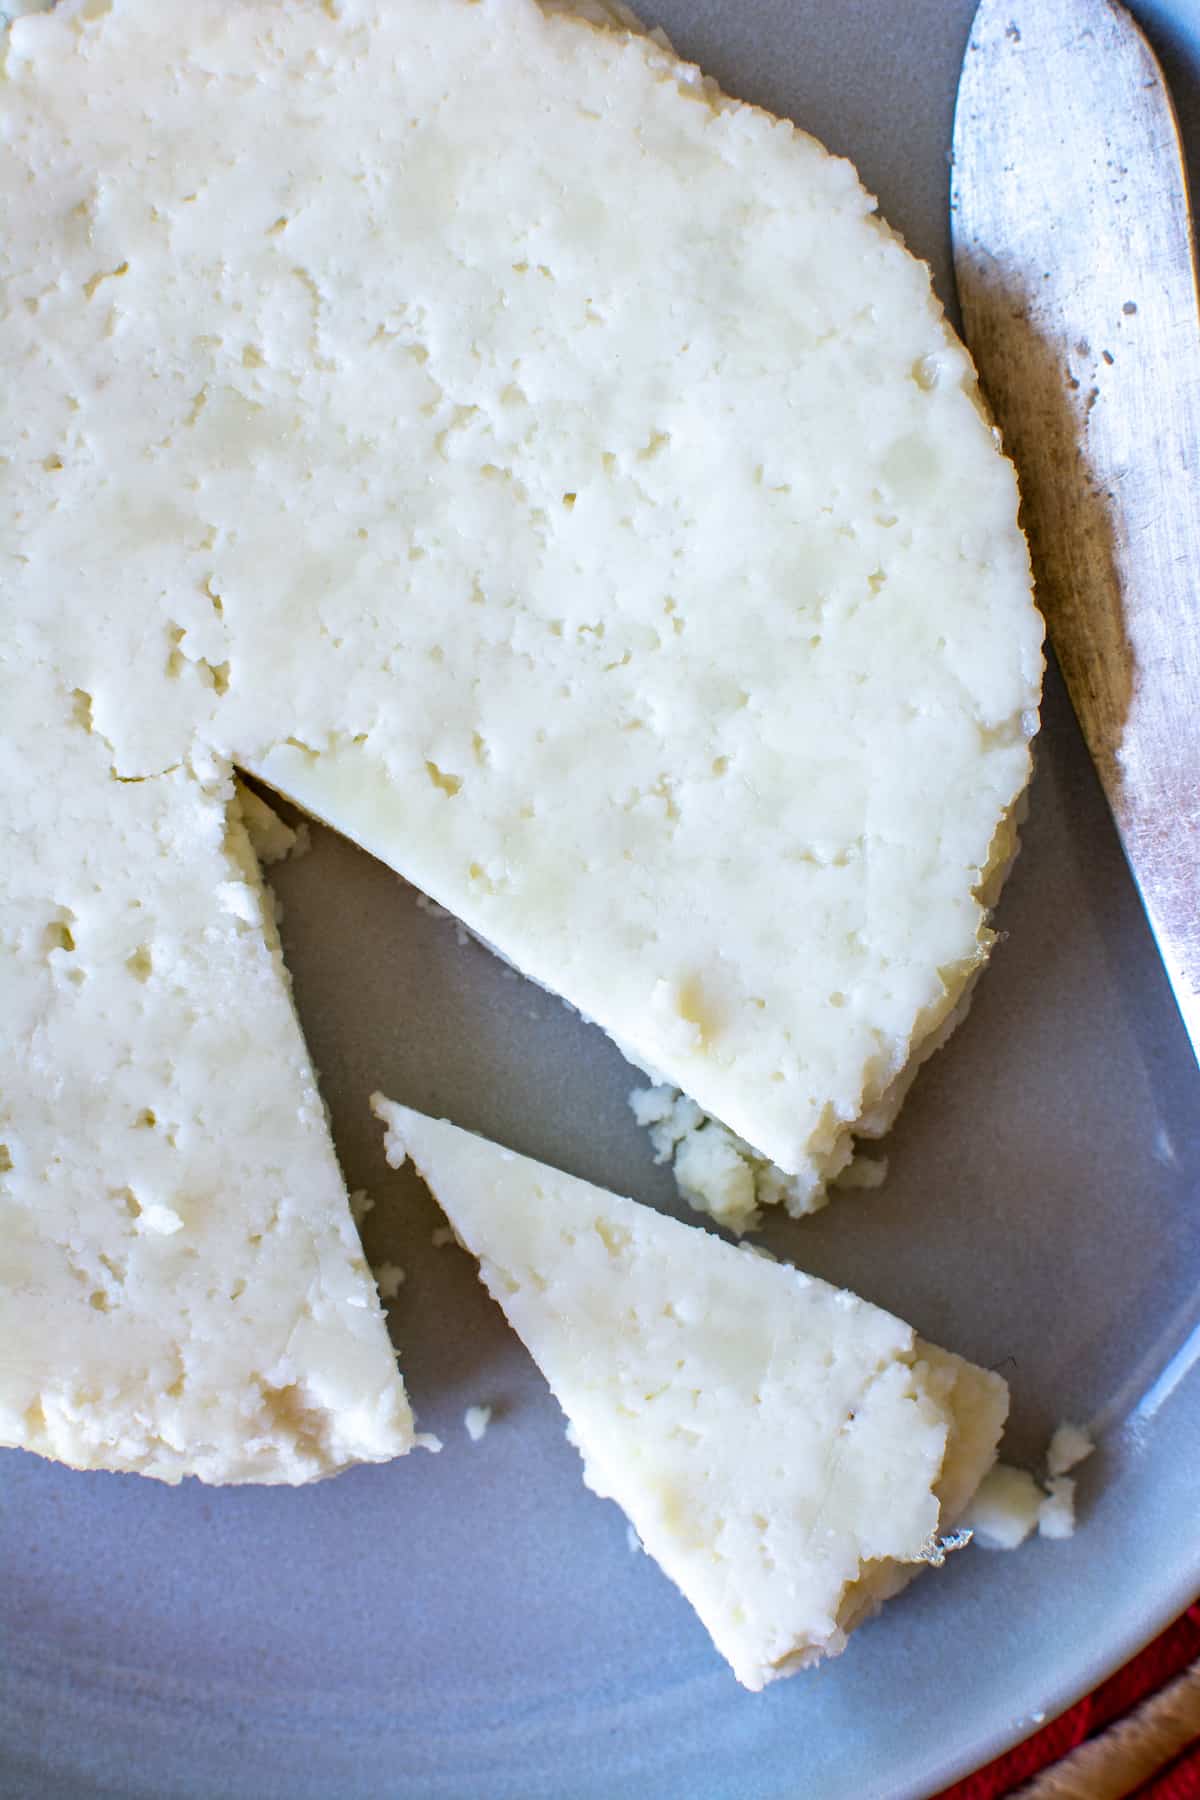 A wheel of Panela cheese with a wedge cut out sitting on a white plate with a knife on the side.